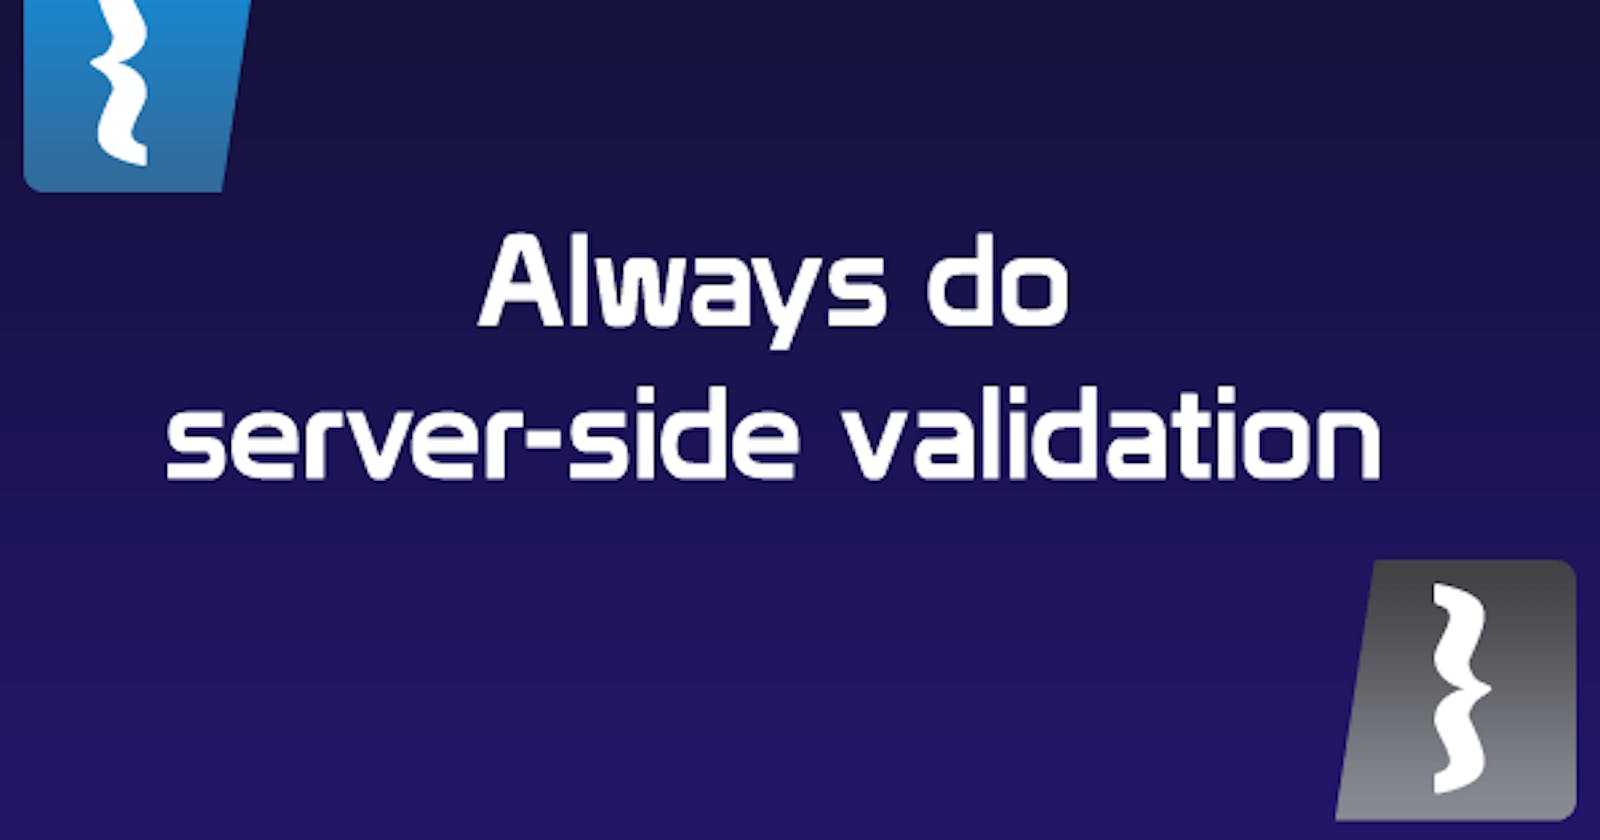 Why do we need to add server-side validation? Didn't we add validation in the front-end section?